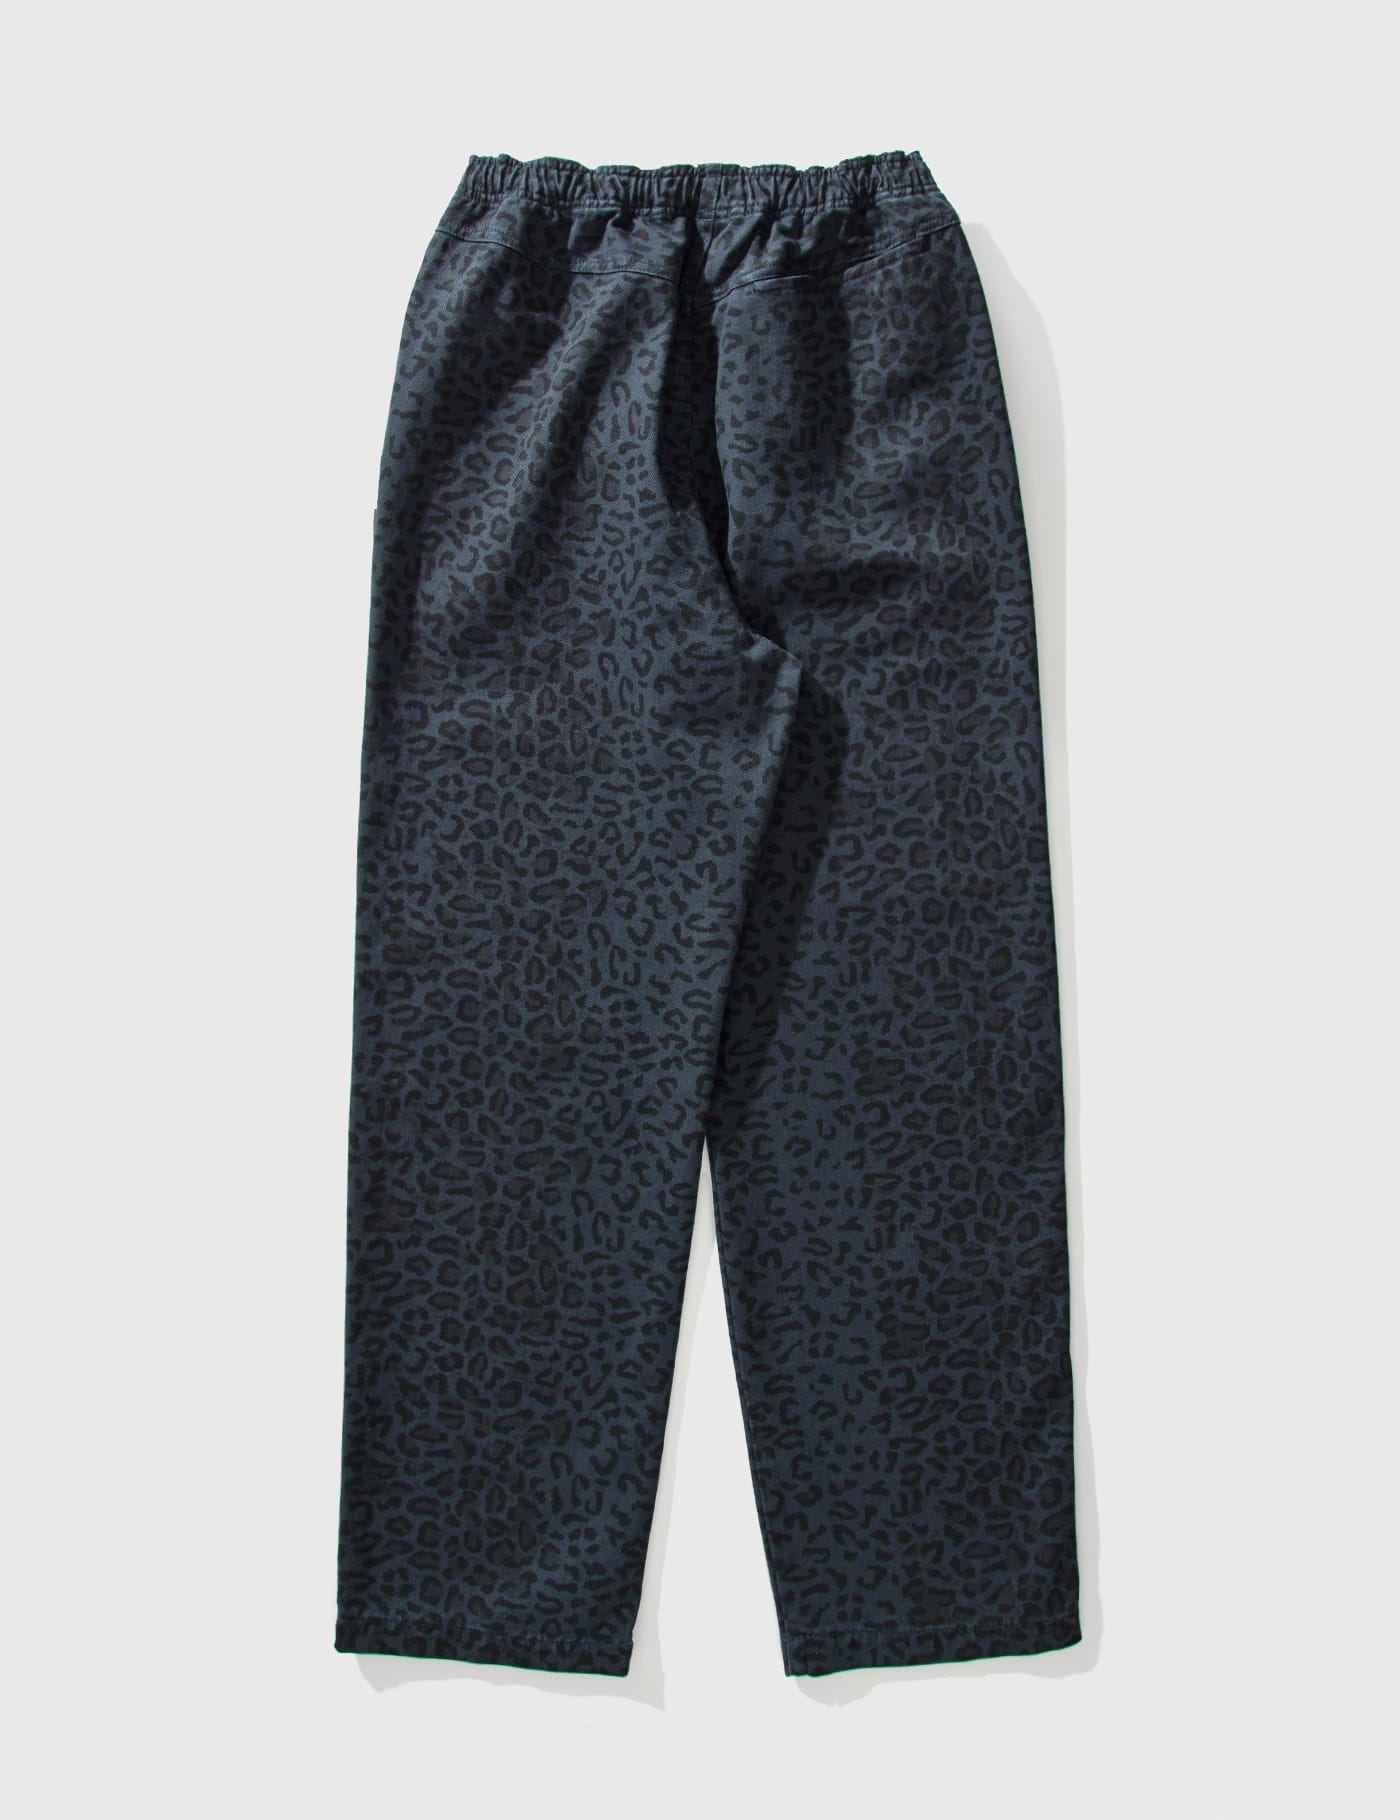 Stüssy - Leopard Beach Pants | HBX - Globally Curated Fashion and